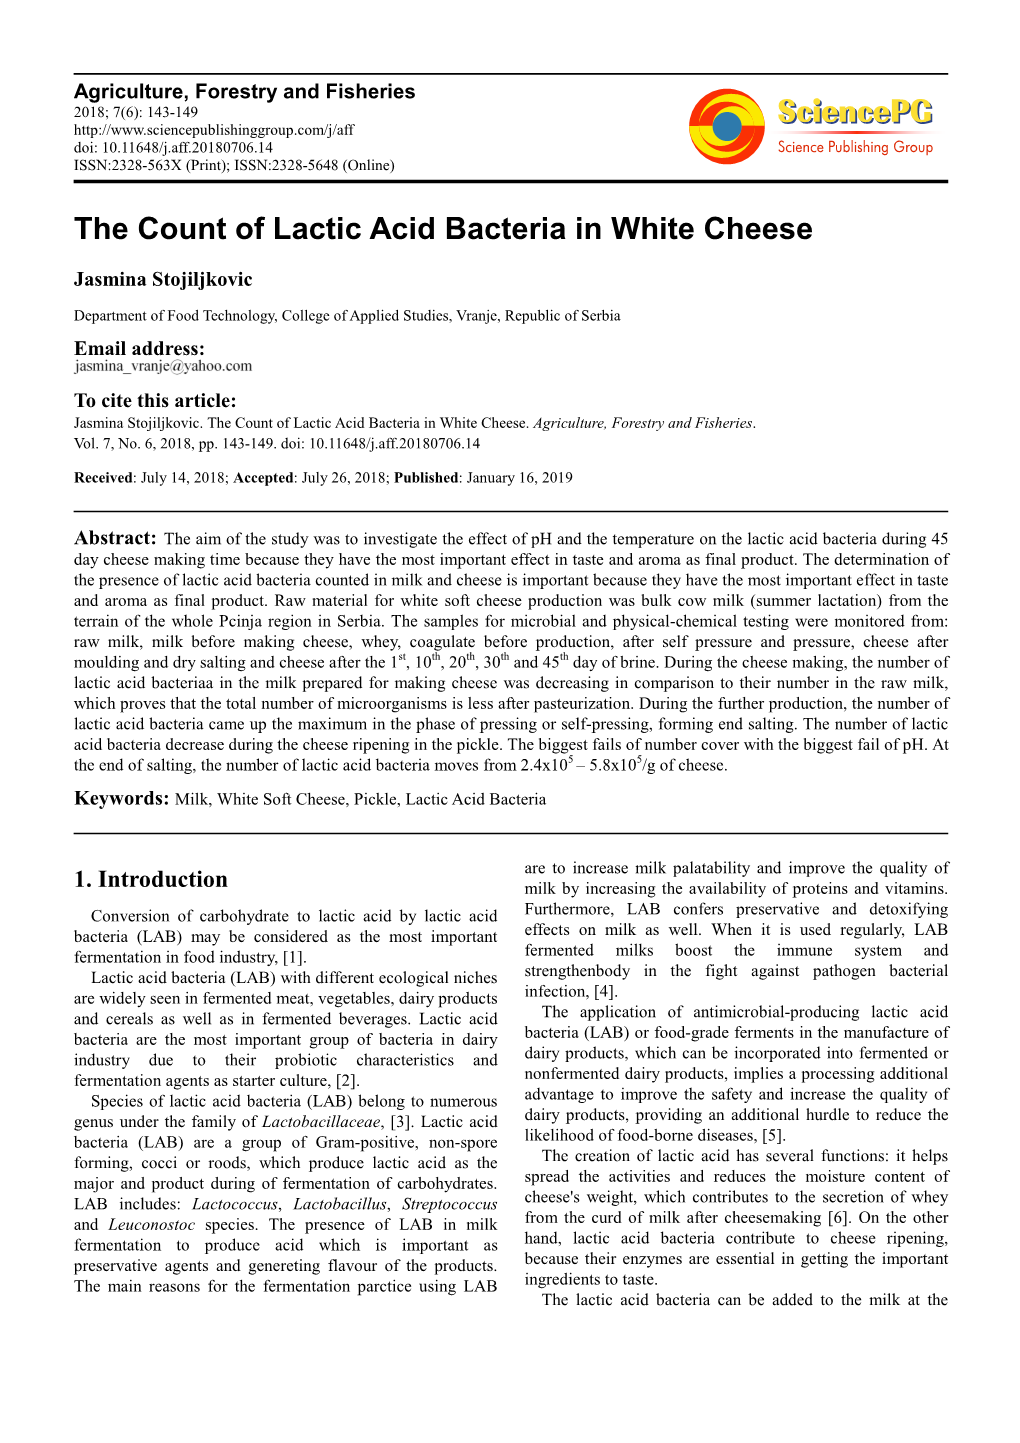 The Count of Lactic Acid Bacteria in White Cheese